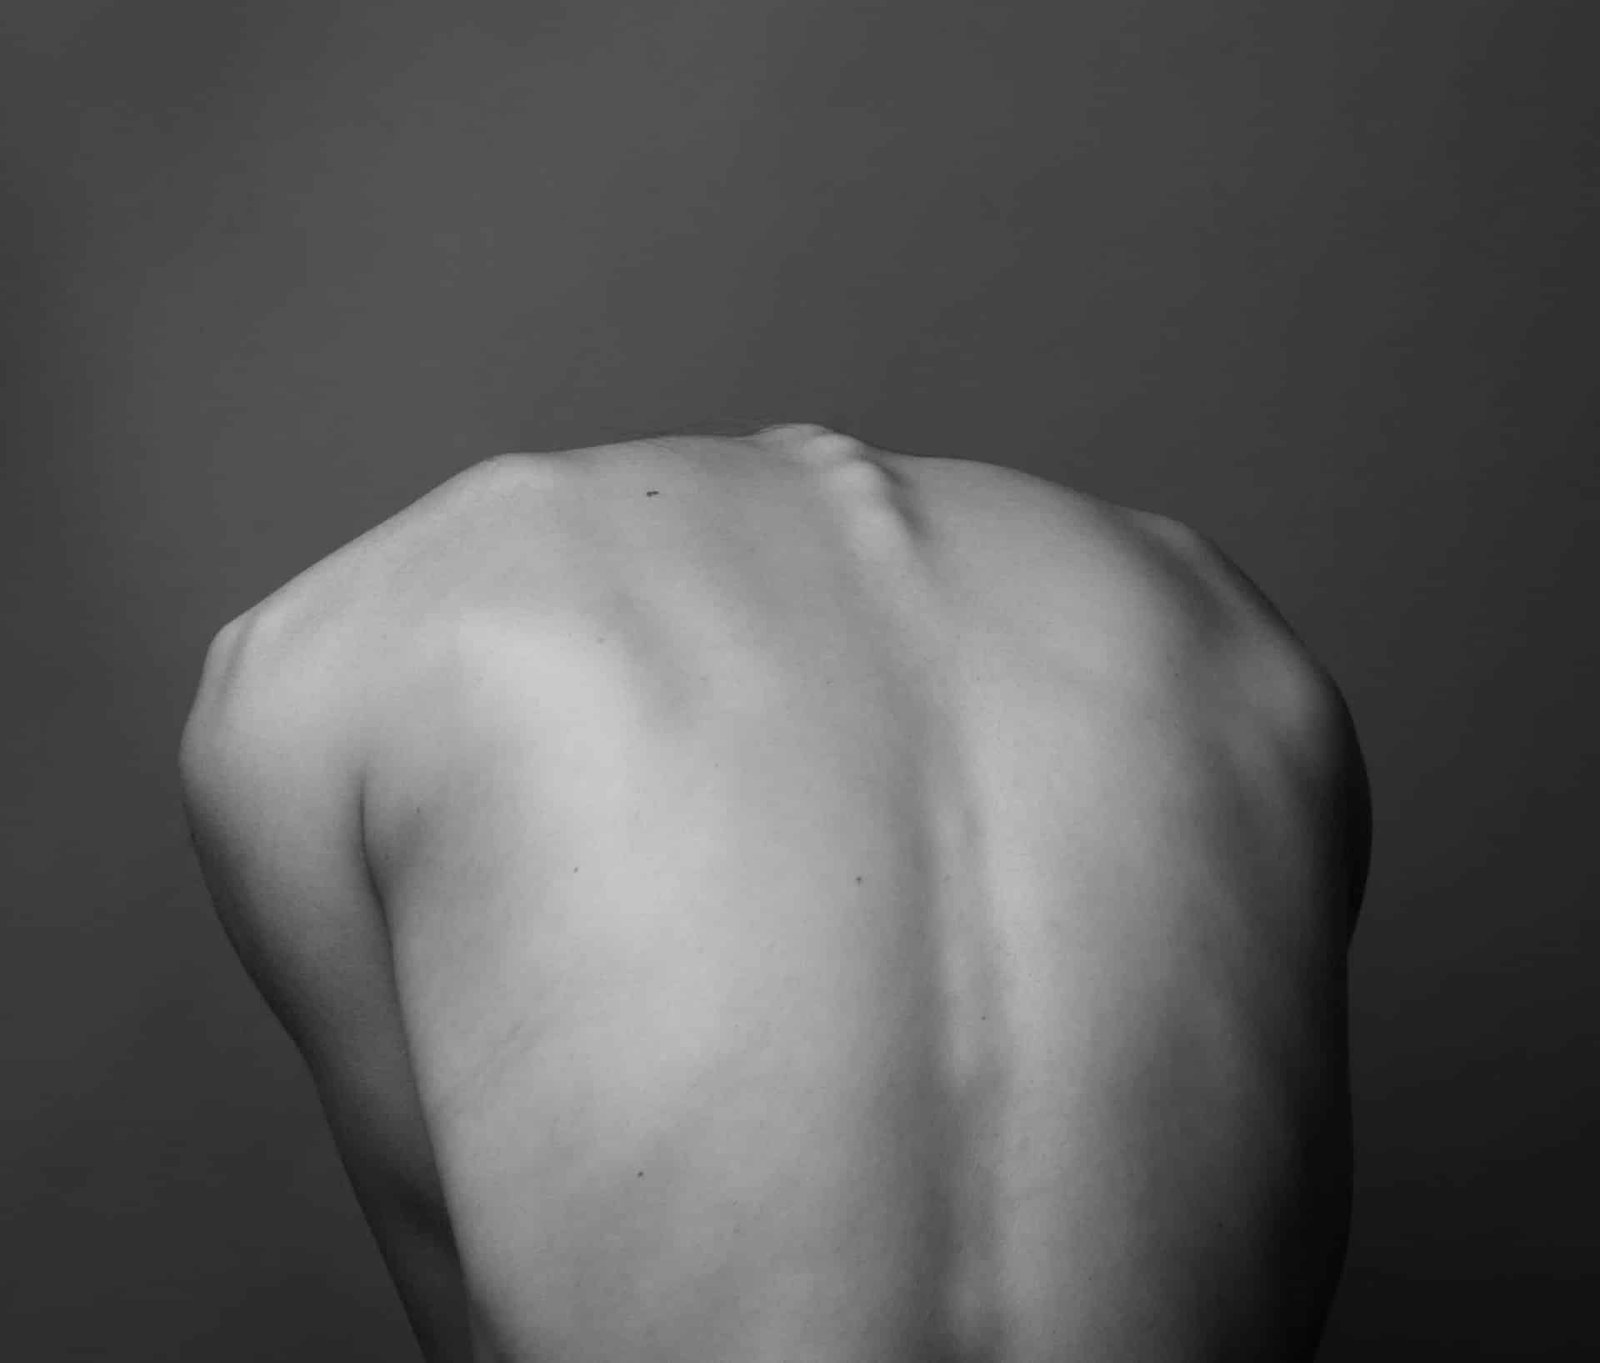 black and white photo of a human back with their head bent forward and the spine sticking out